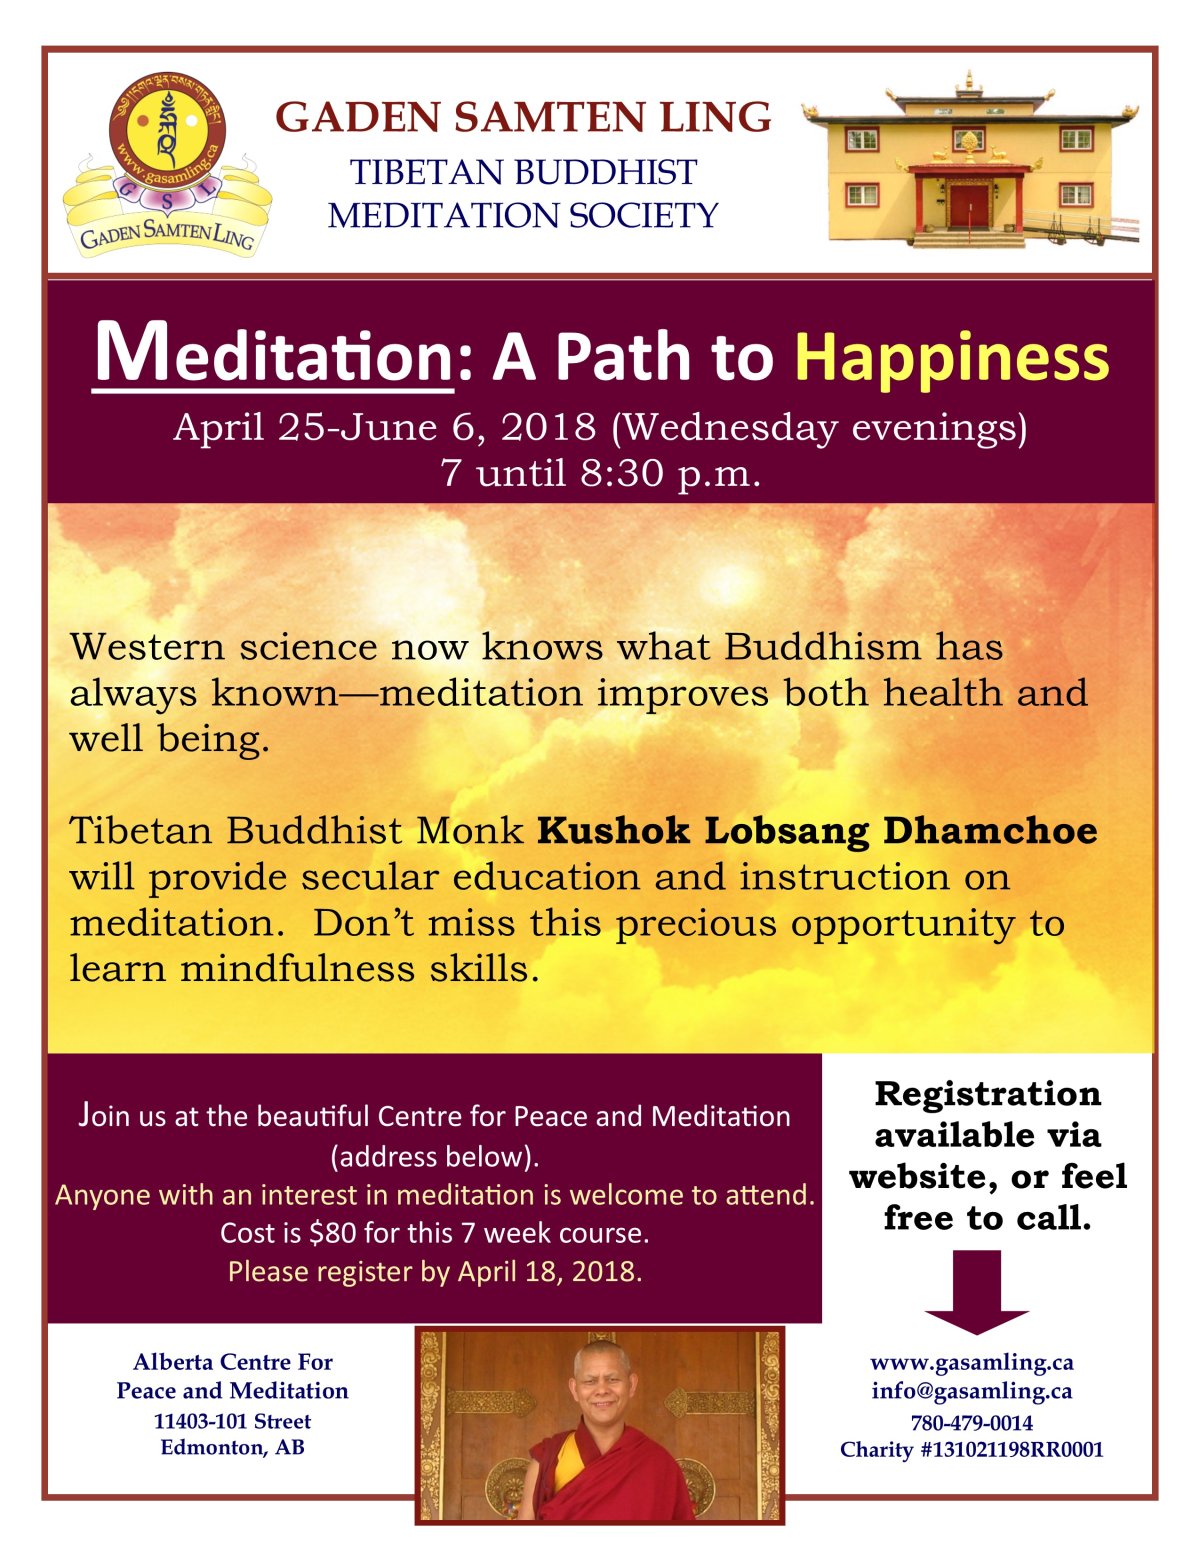 Meditation: A Path to Happiness - image